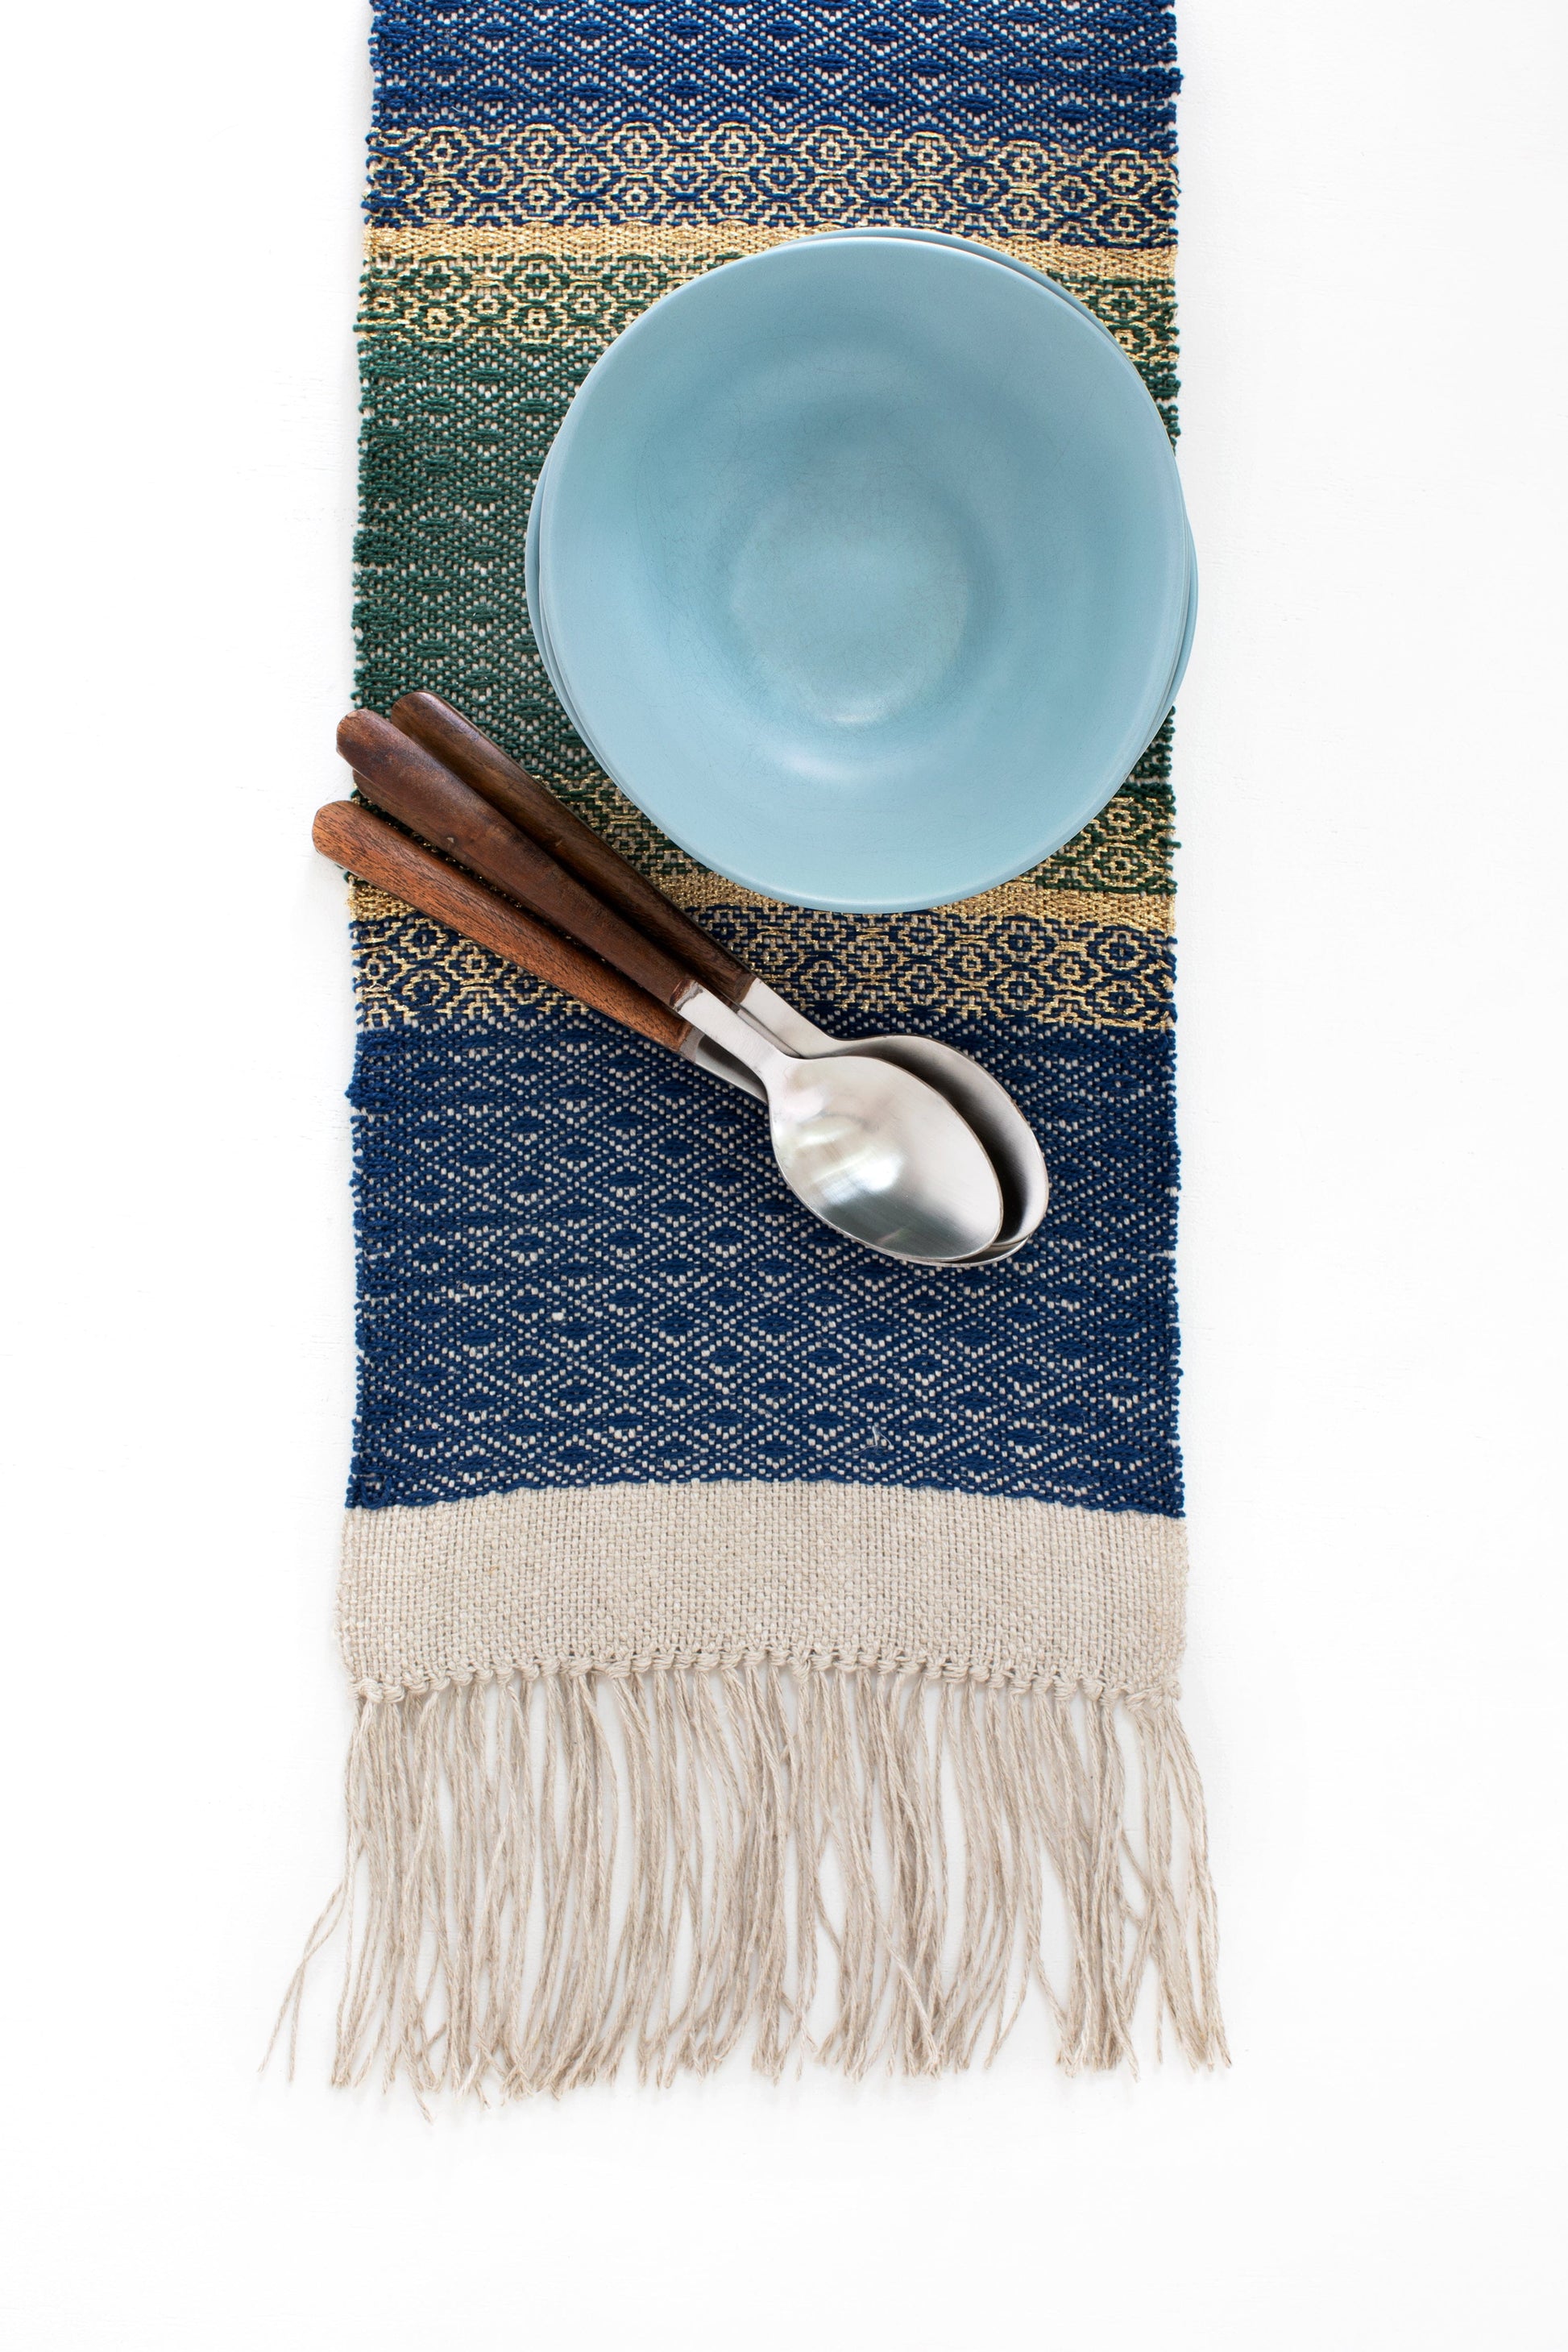 The Carpentry Shop Co. Handmade 100% Wool Woven Placemats by Local Artisan